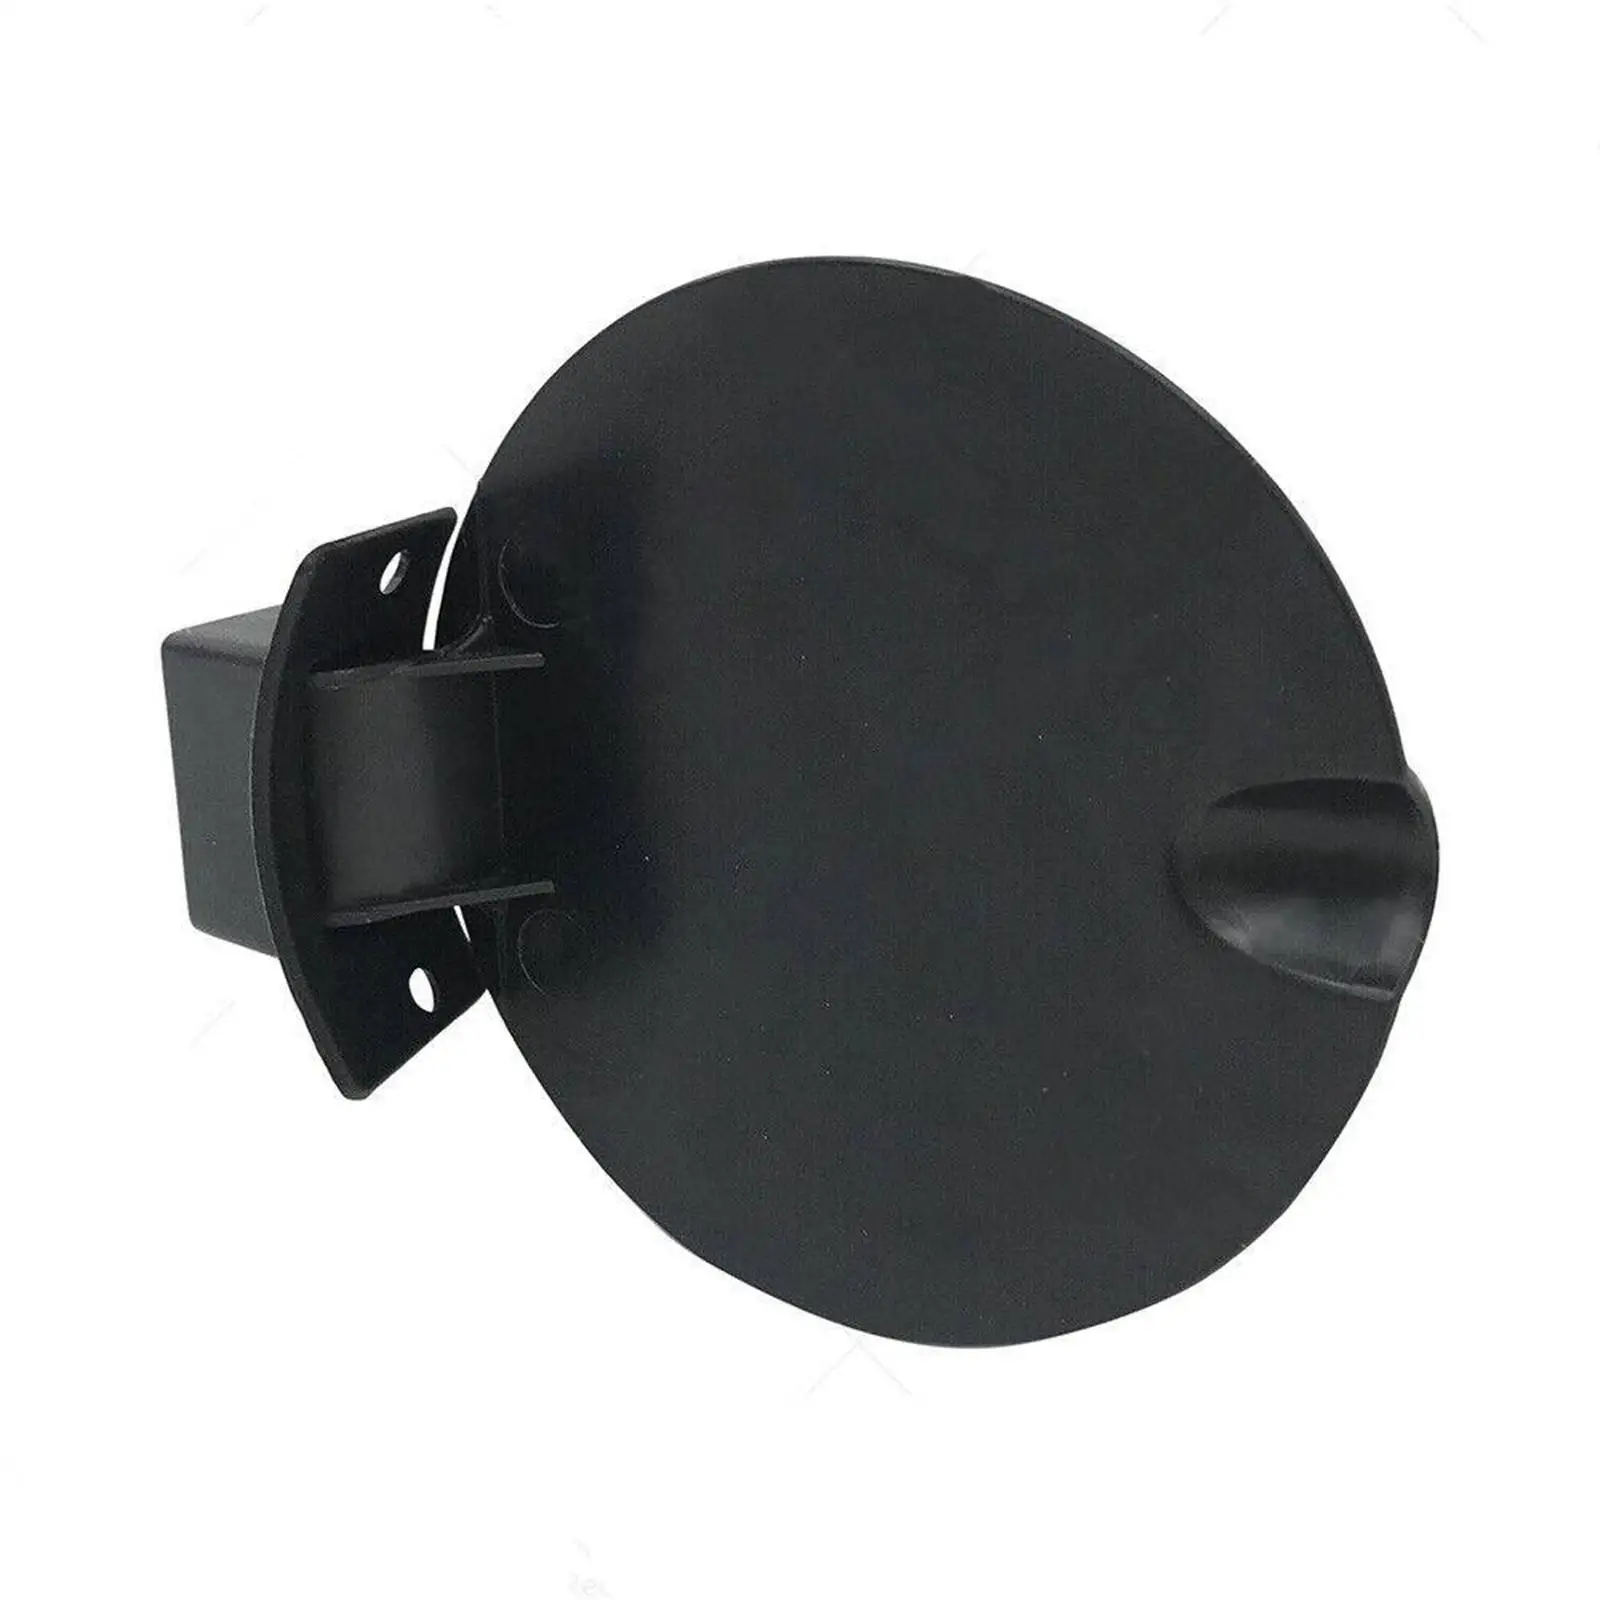 Fuel Filler Flap Fuel Tank Cap Accessories Repair for Holden 2000 to 2007 VU Vy Vz Replaces Easily Install